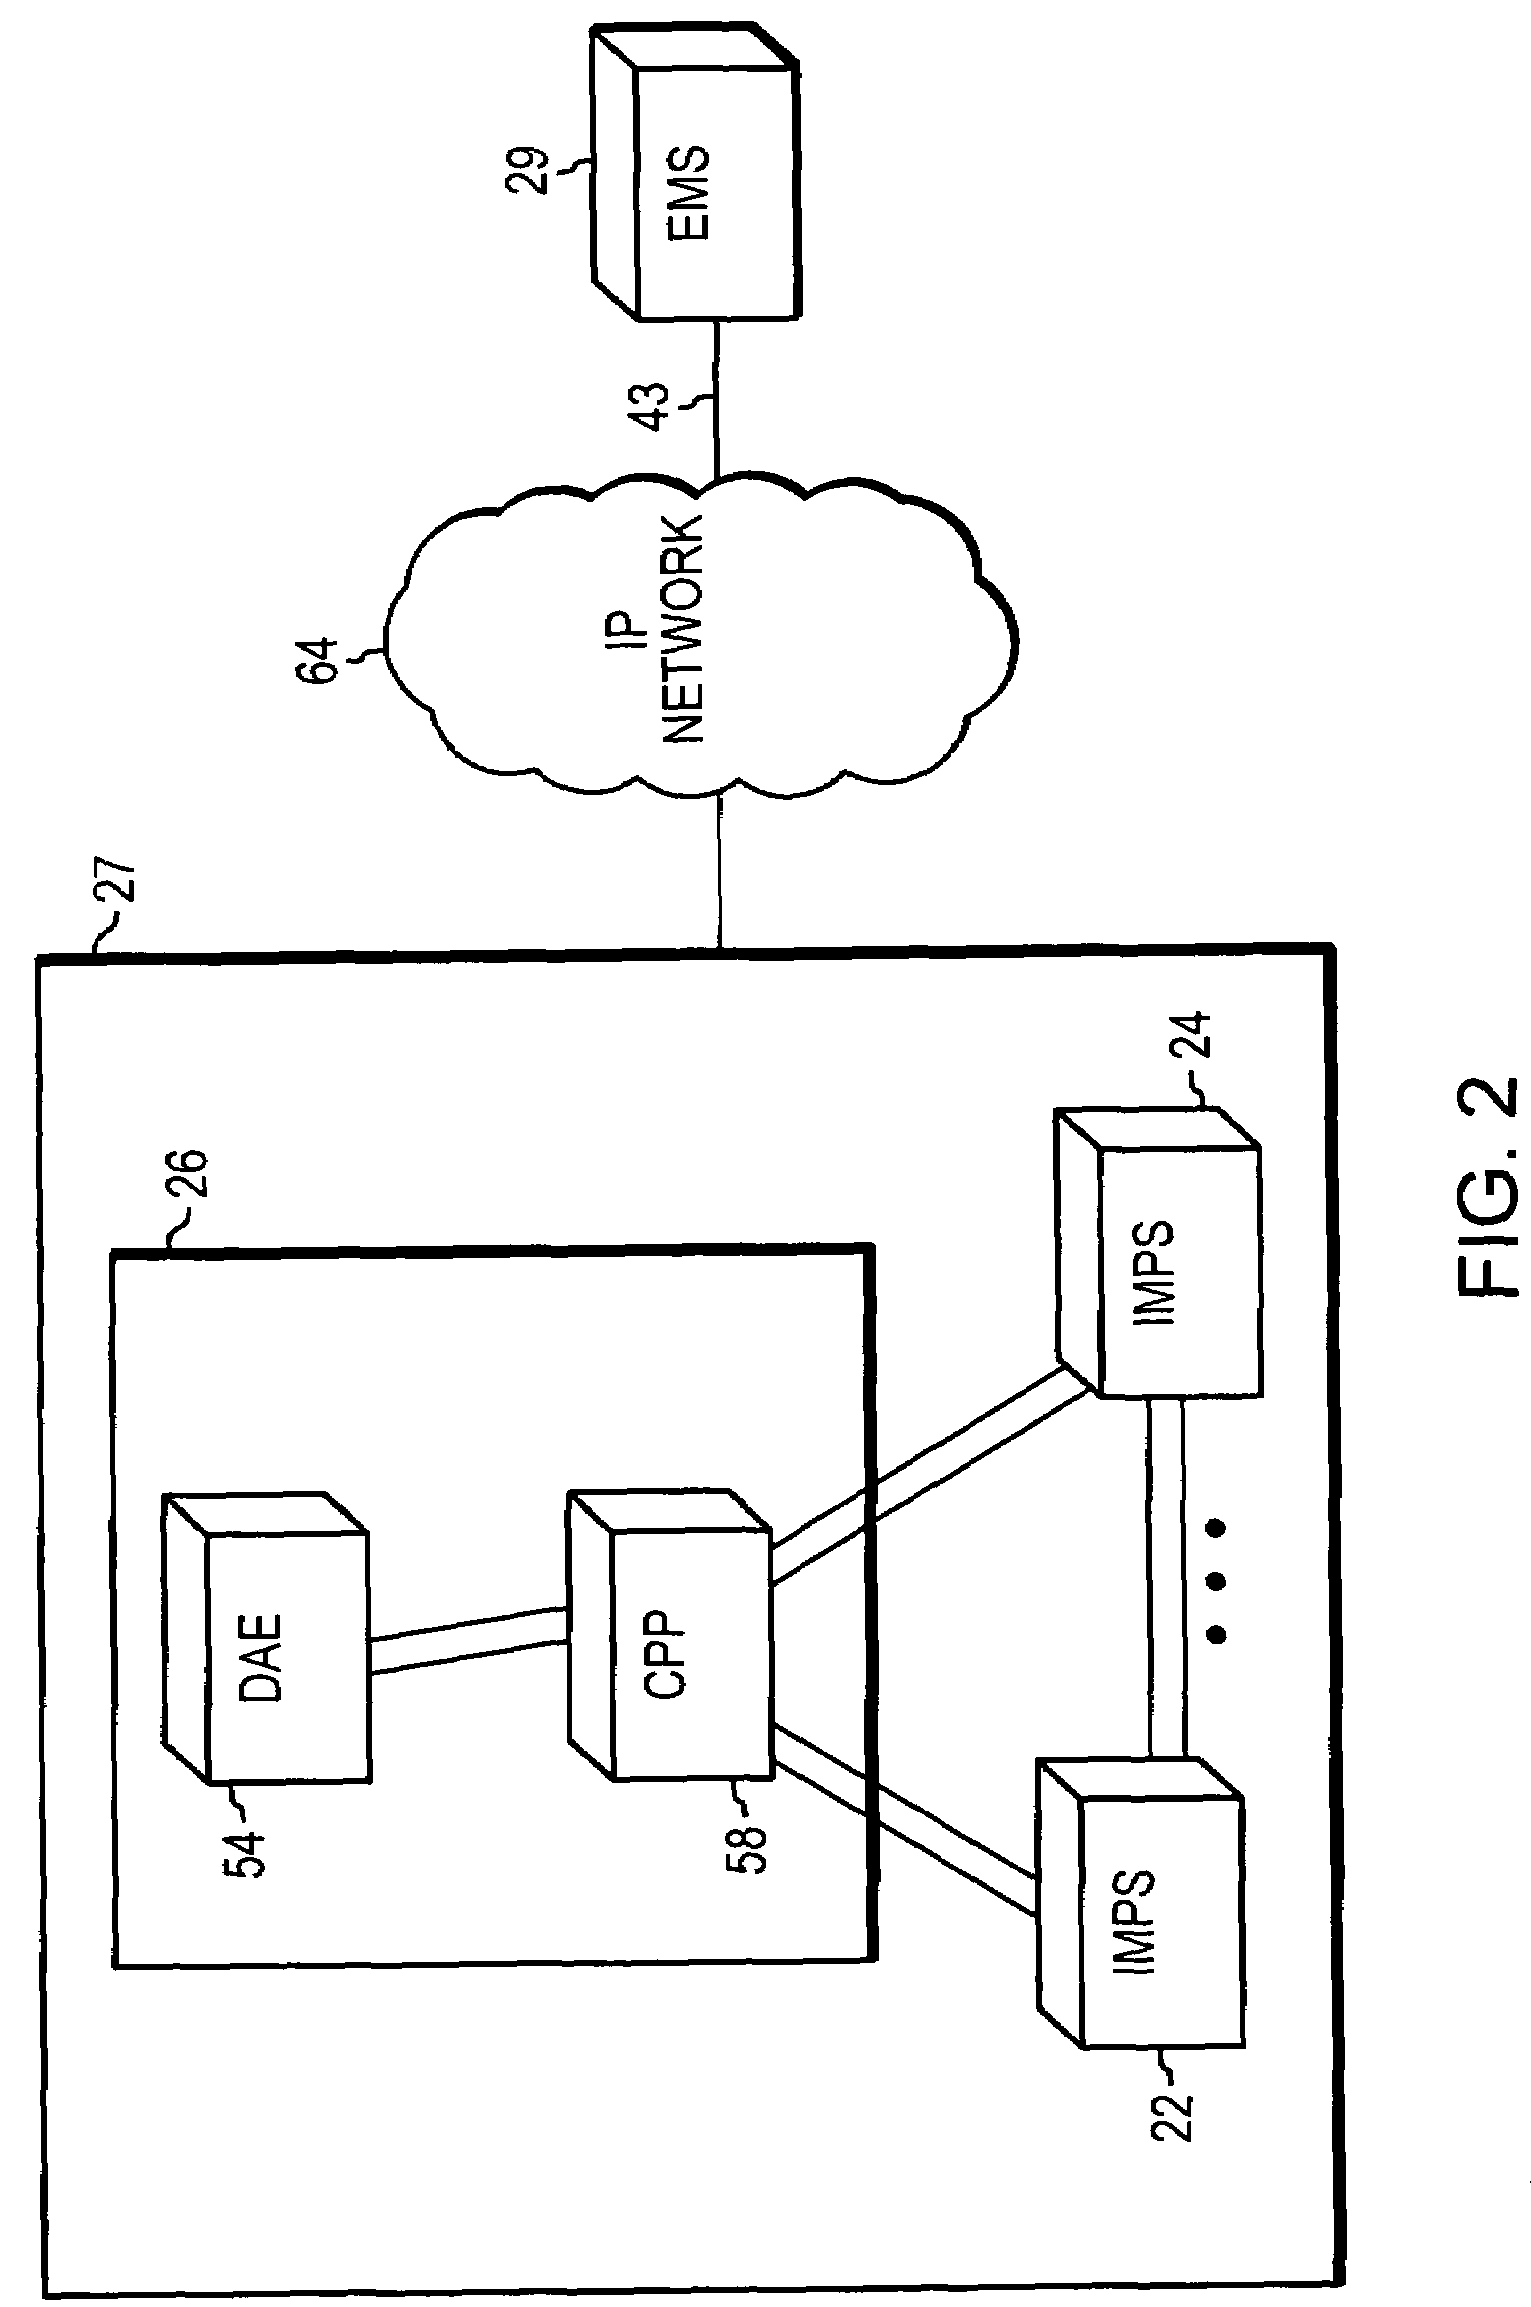 System and method for managing storage networks and providing virtualization of resources in such a network